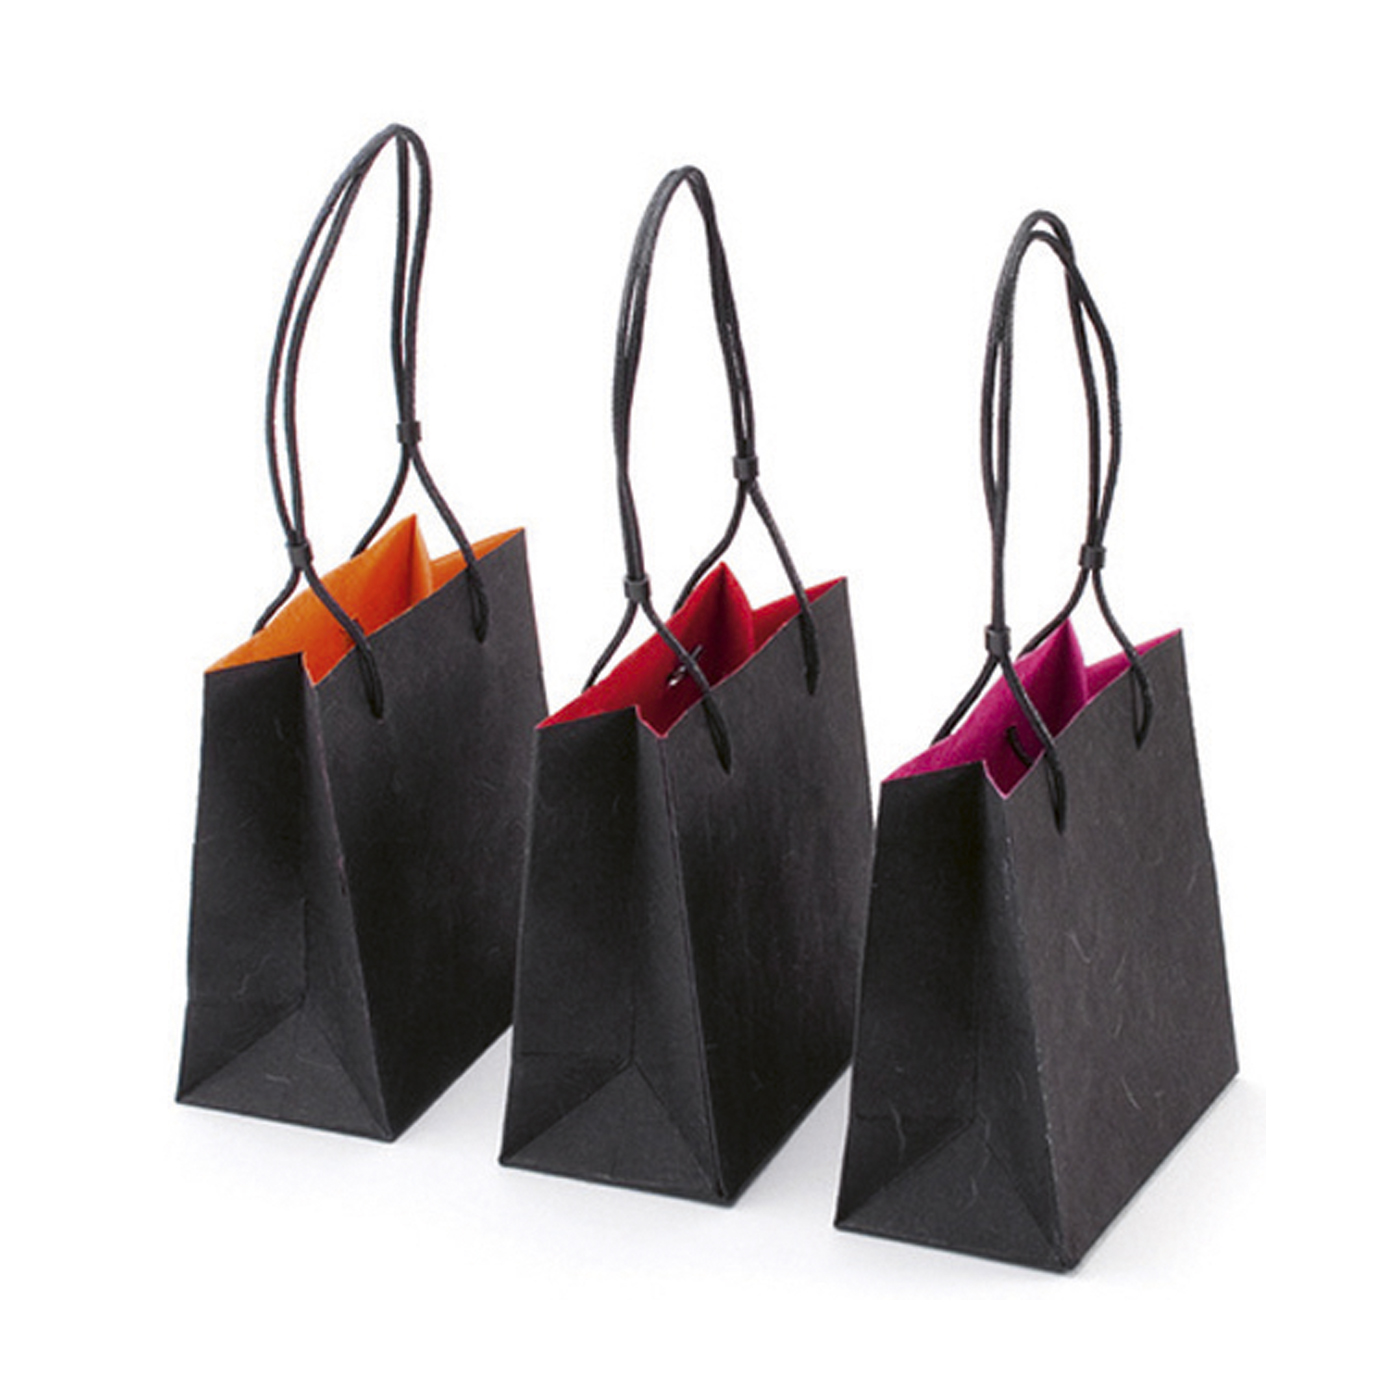 Carrying Bags "Duo", Red/Orange/Pink, 120 x 60 x 120 mm - 3 pieces